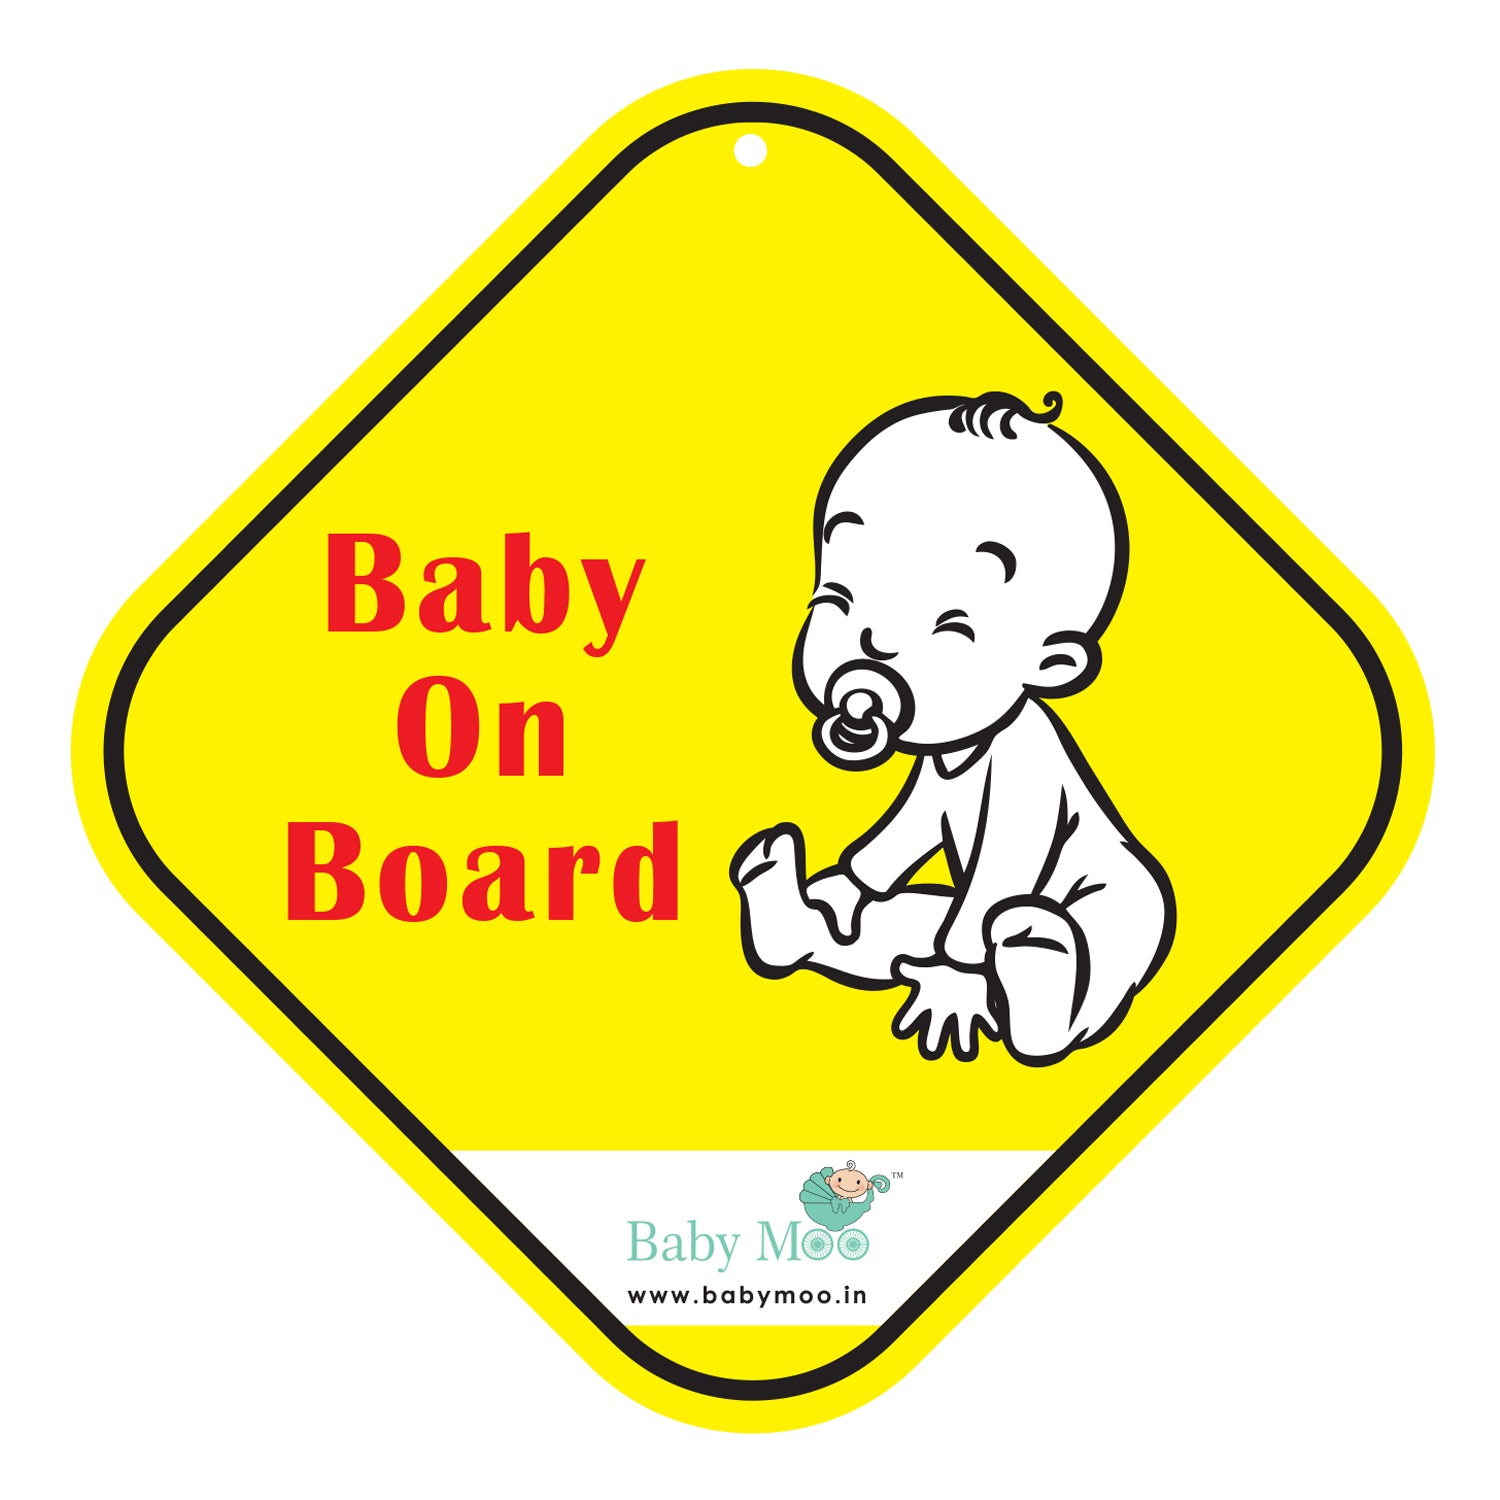 Baby Moo Car Safety Sign Little Baby On Board With Vacuum Suction Cup Clip - Yellow - Baby Moo